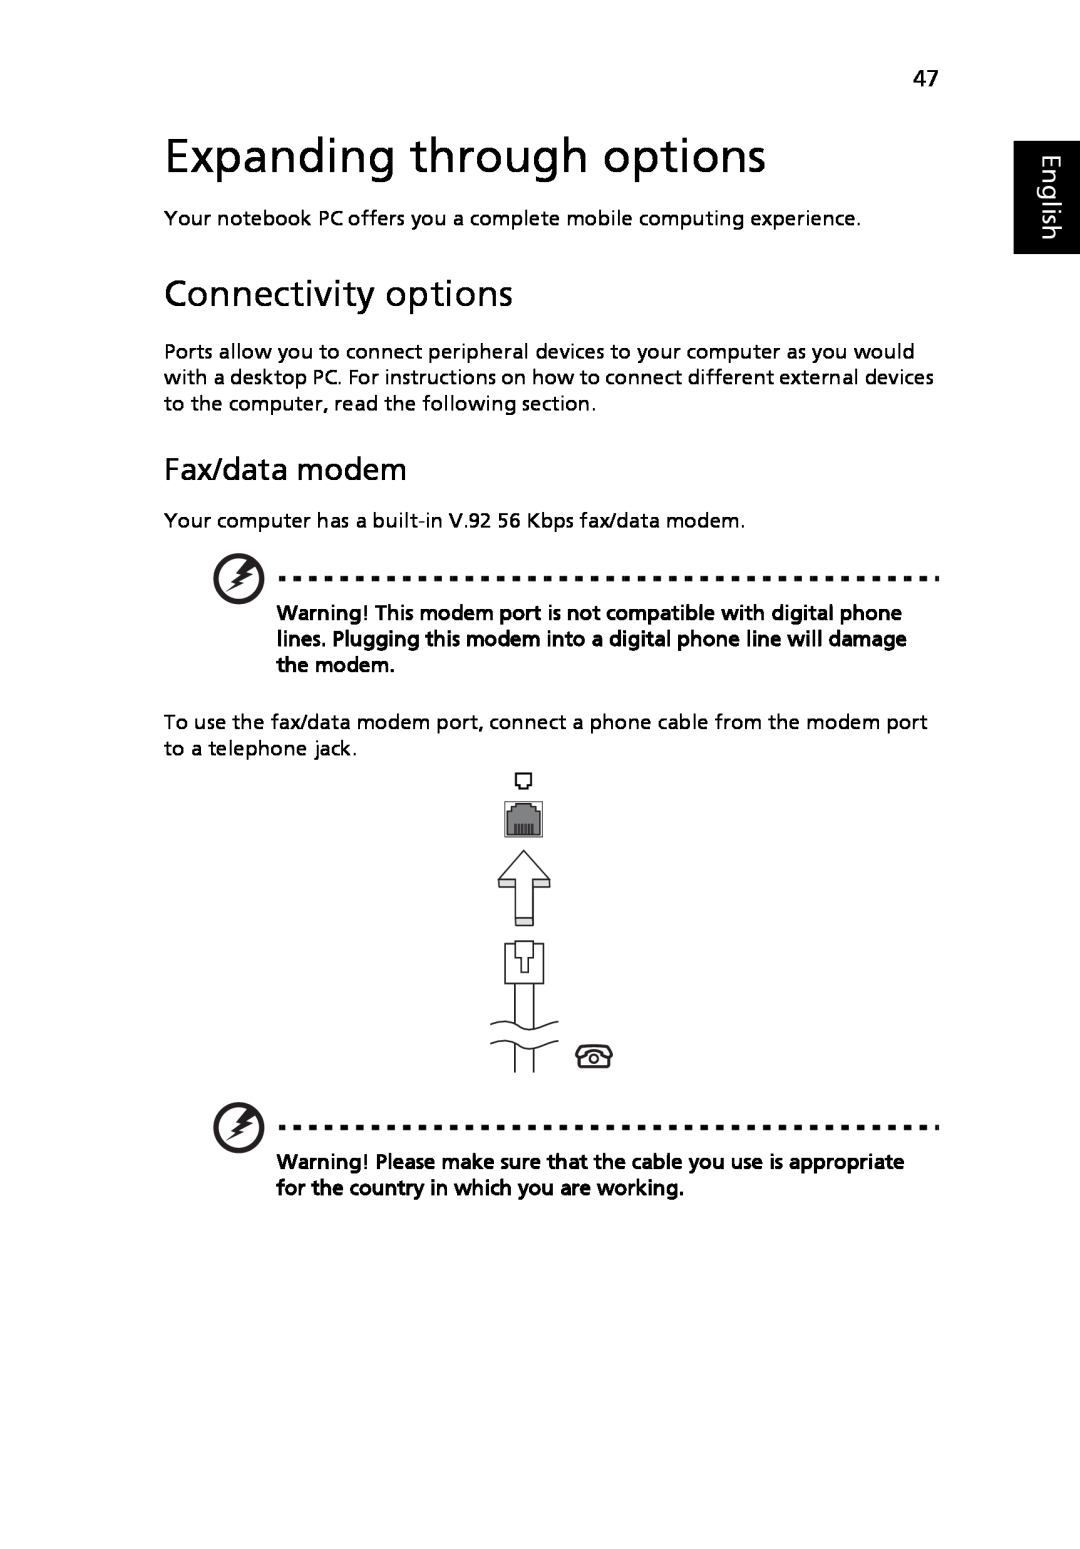 Acer 3630 manual Expanding through options, Connectivity options, Fax/data modem, English 